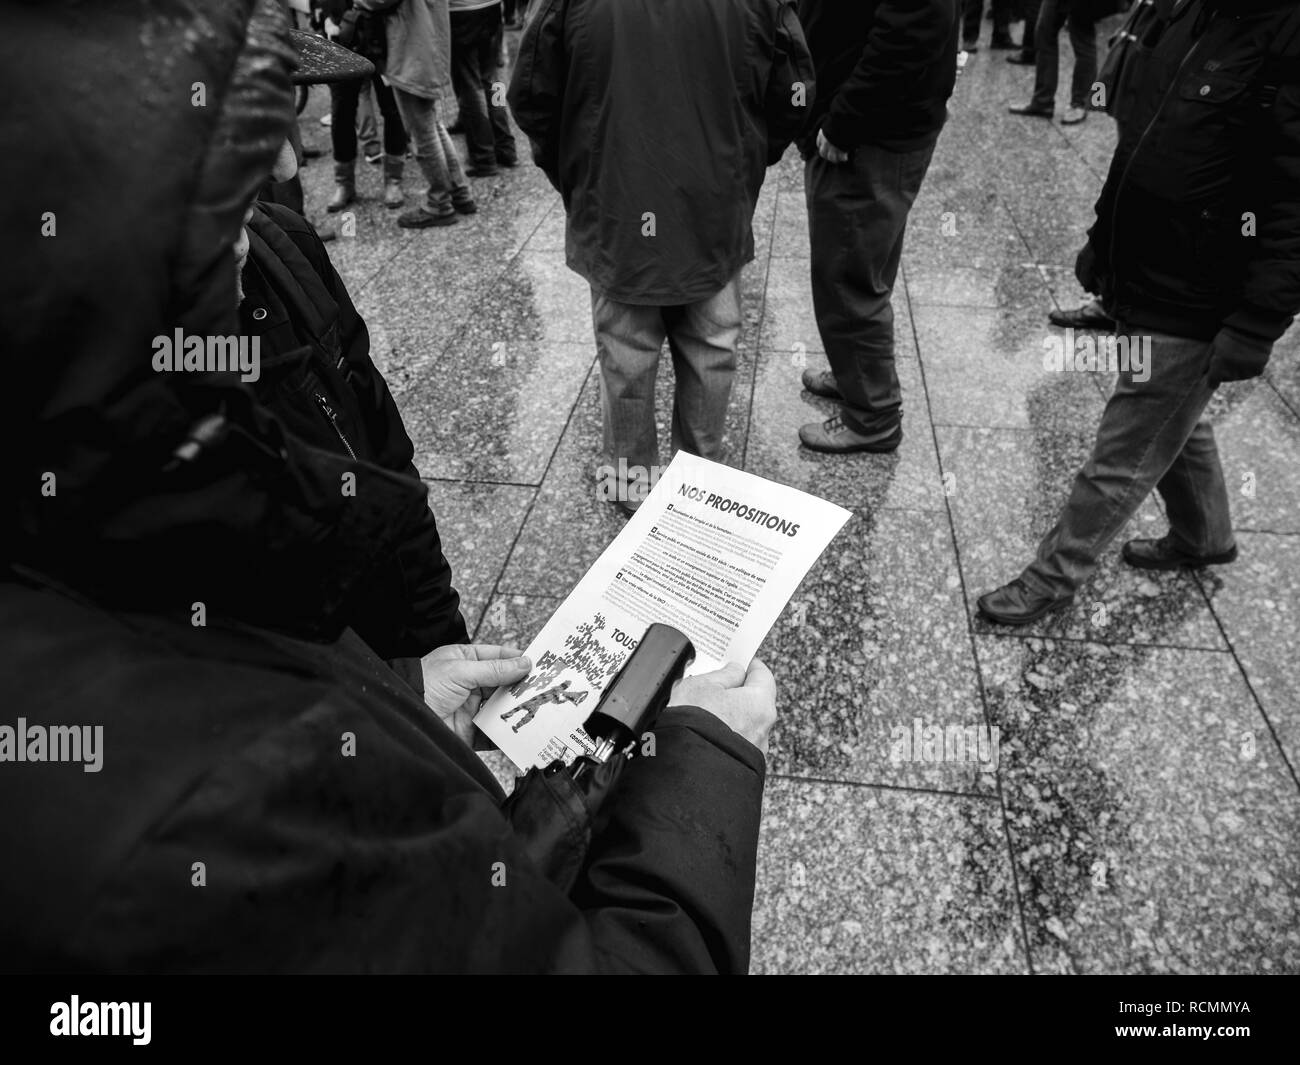 STRASBOURG, FRANCE  - MAR 22, 2018: People at demonstration protest against Macron French government string of reforms, mutiple trade unions have called public workers to strike - black and white  Stock Photo